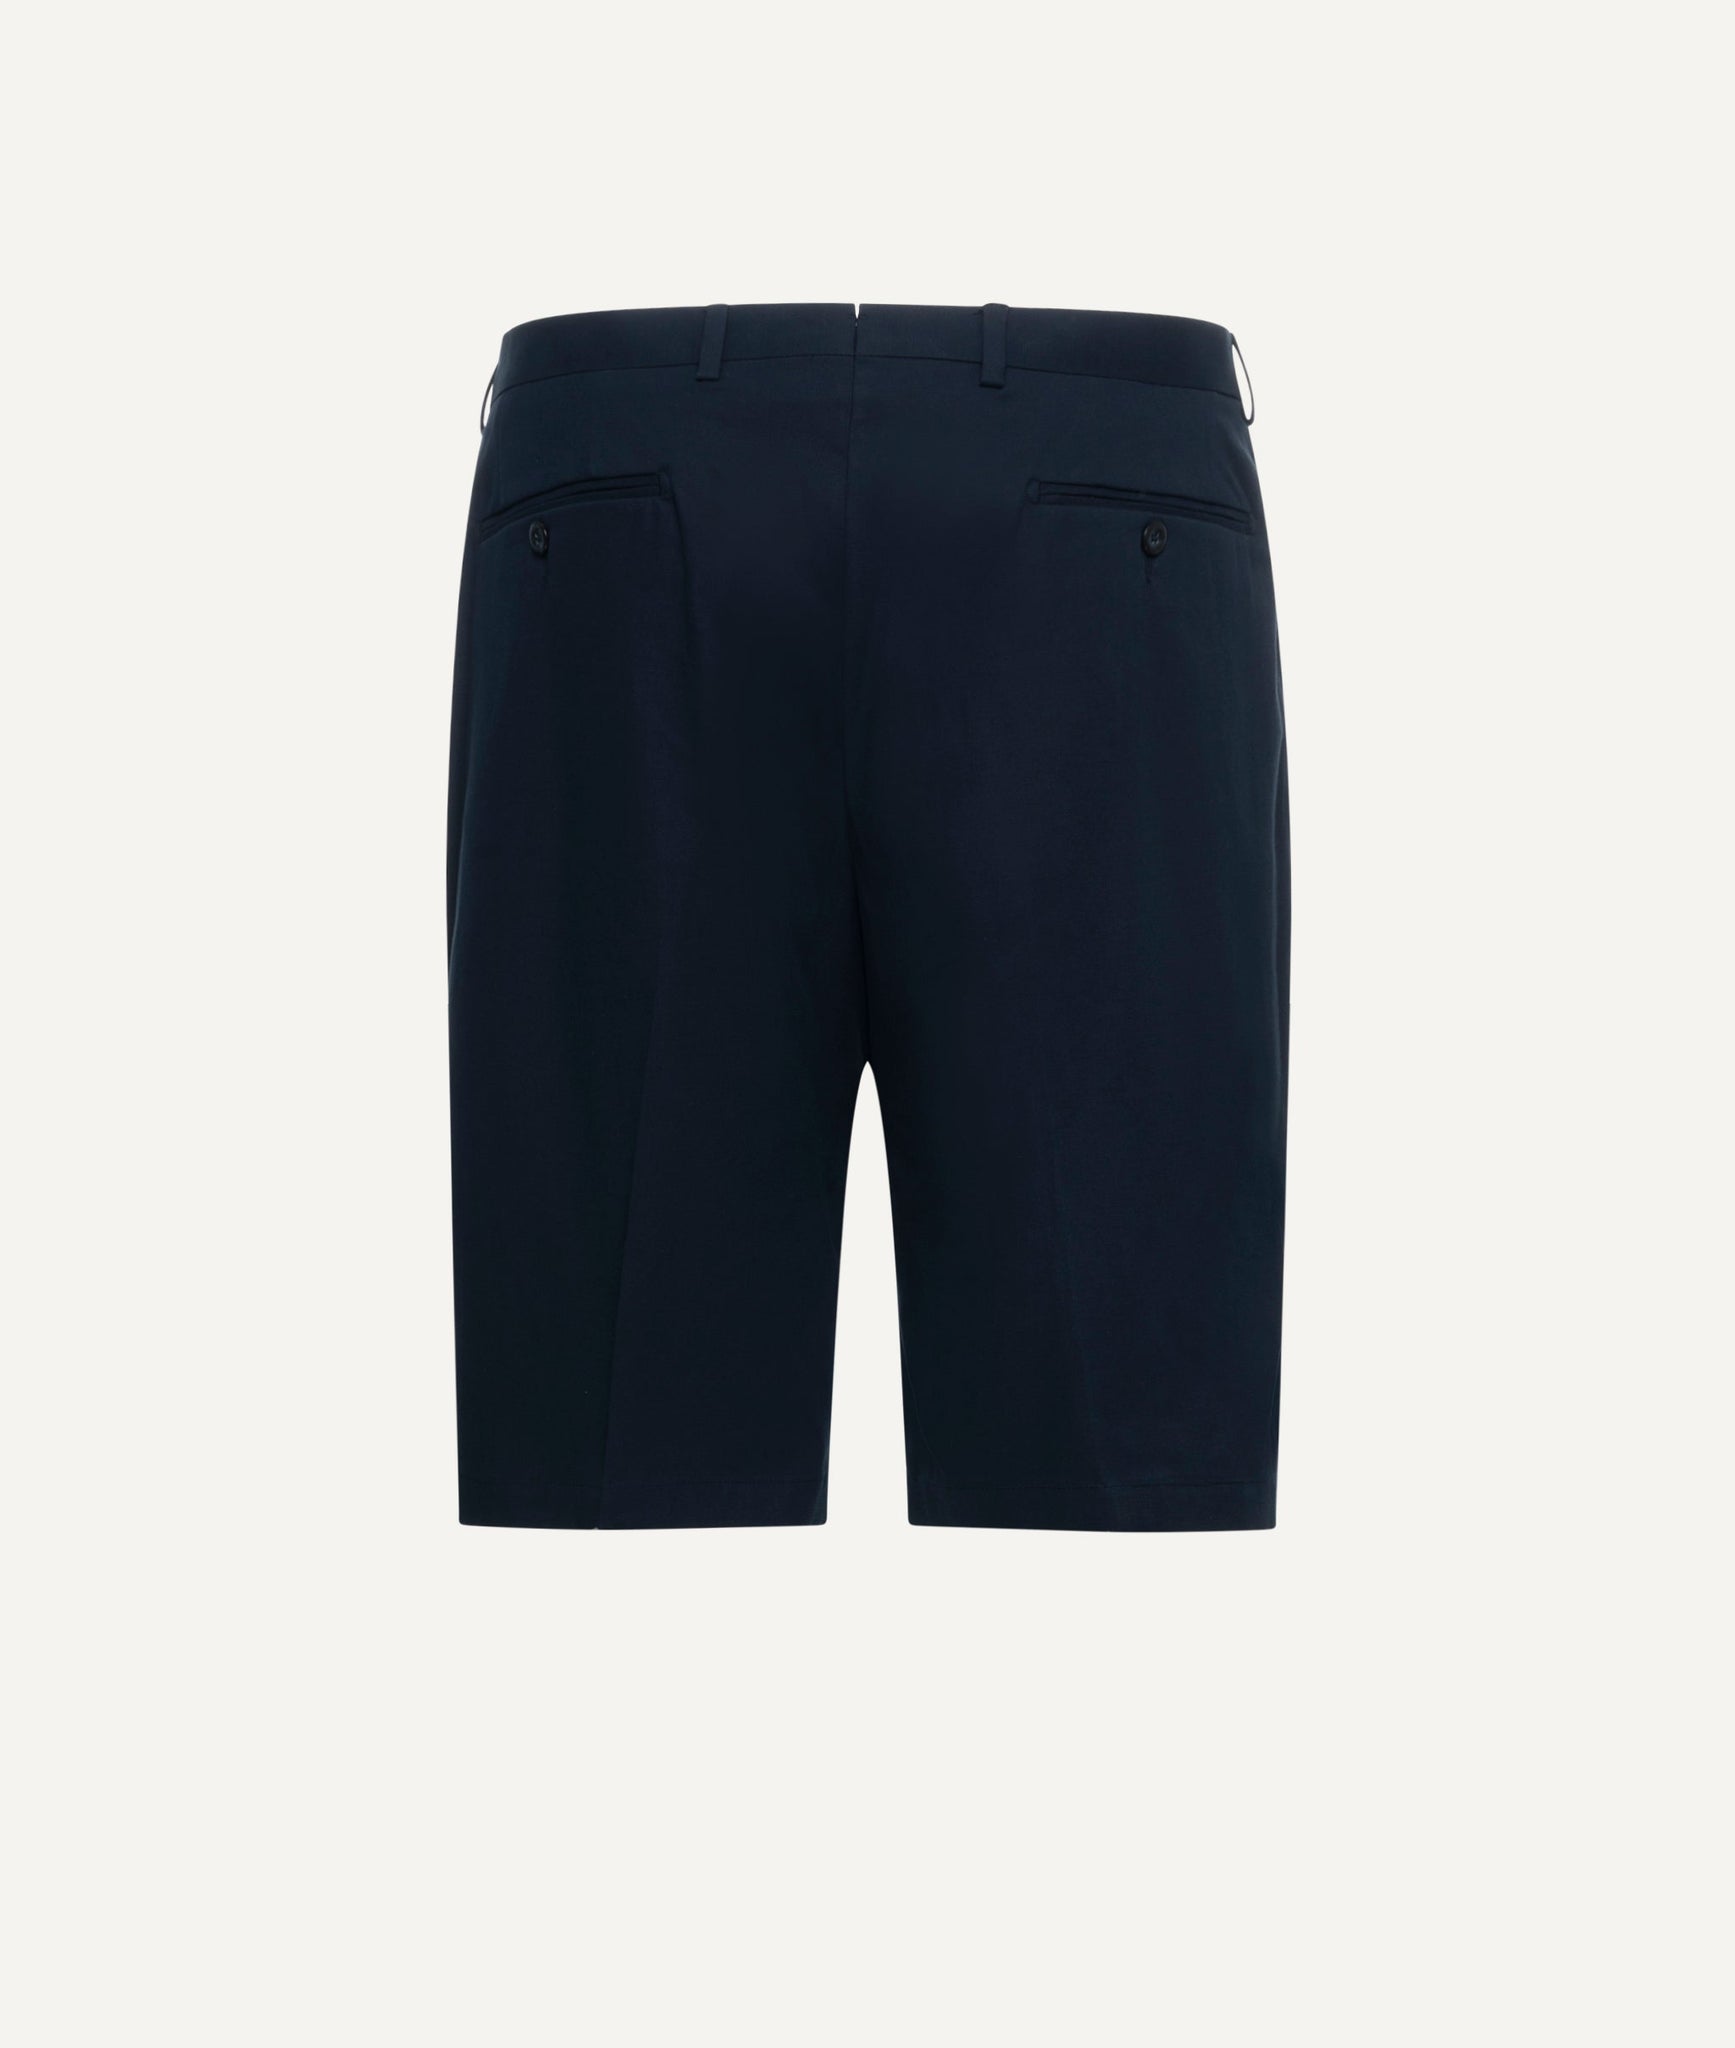 North Star - Shorts in Cotton